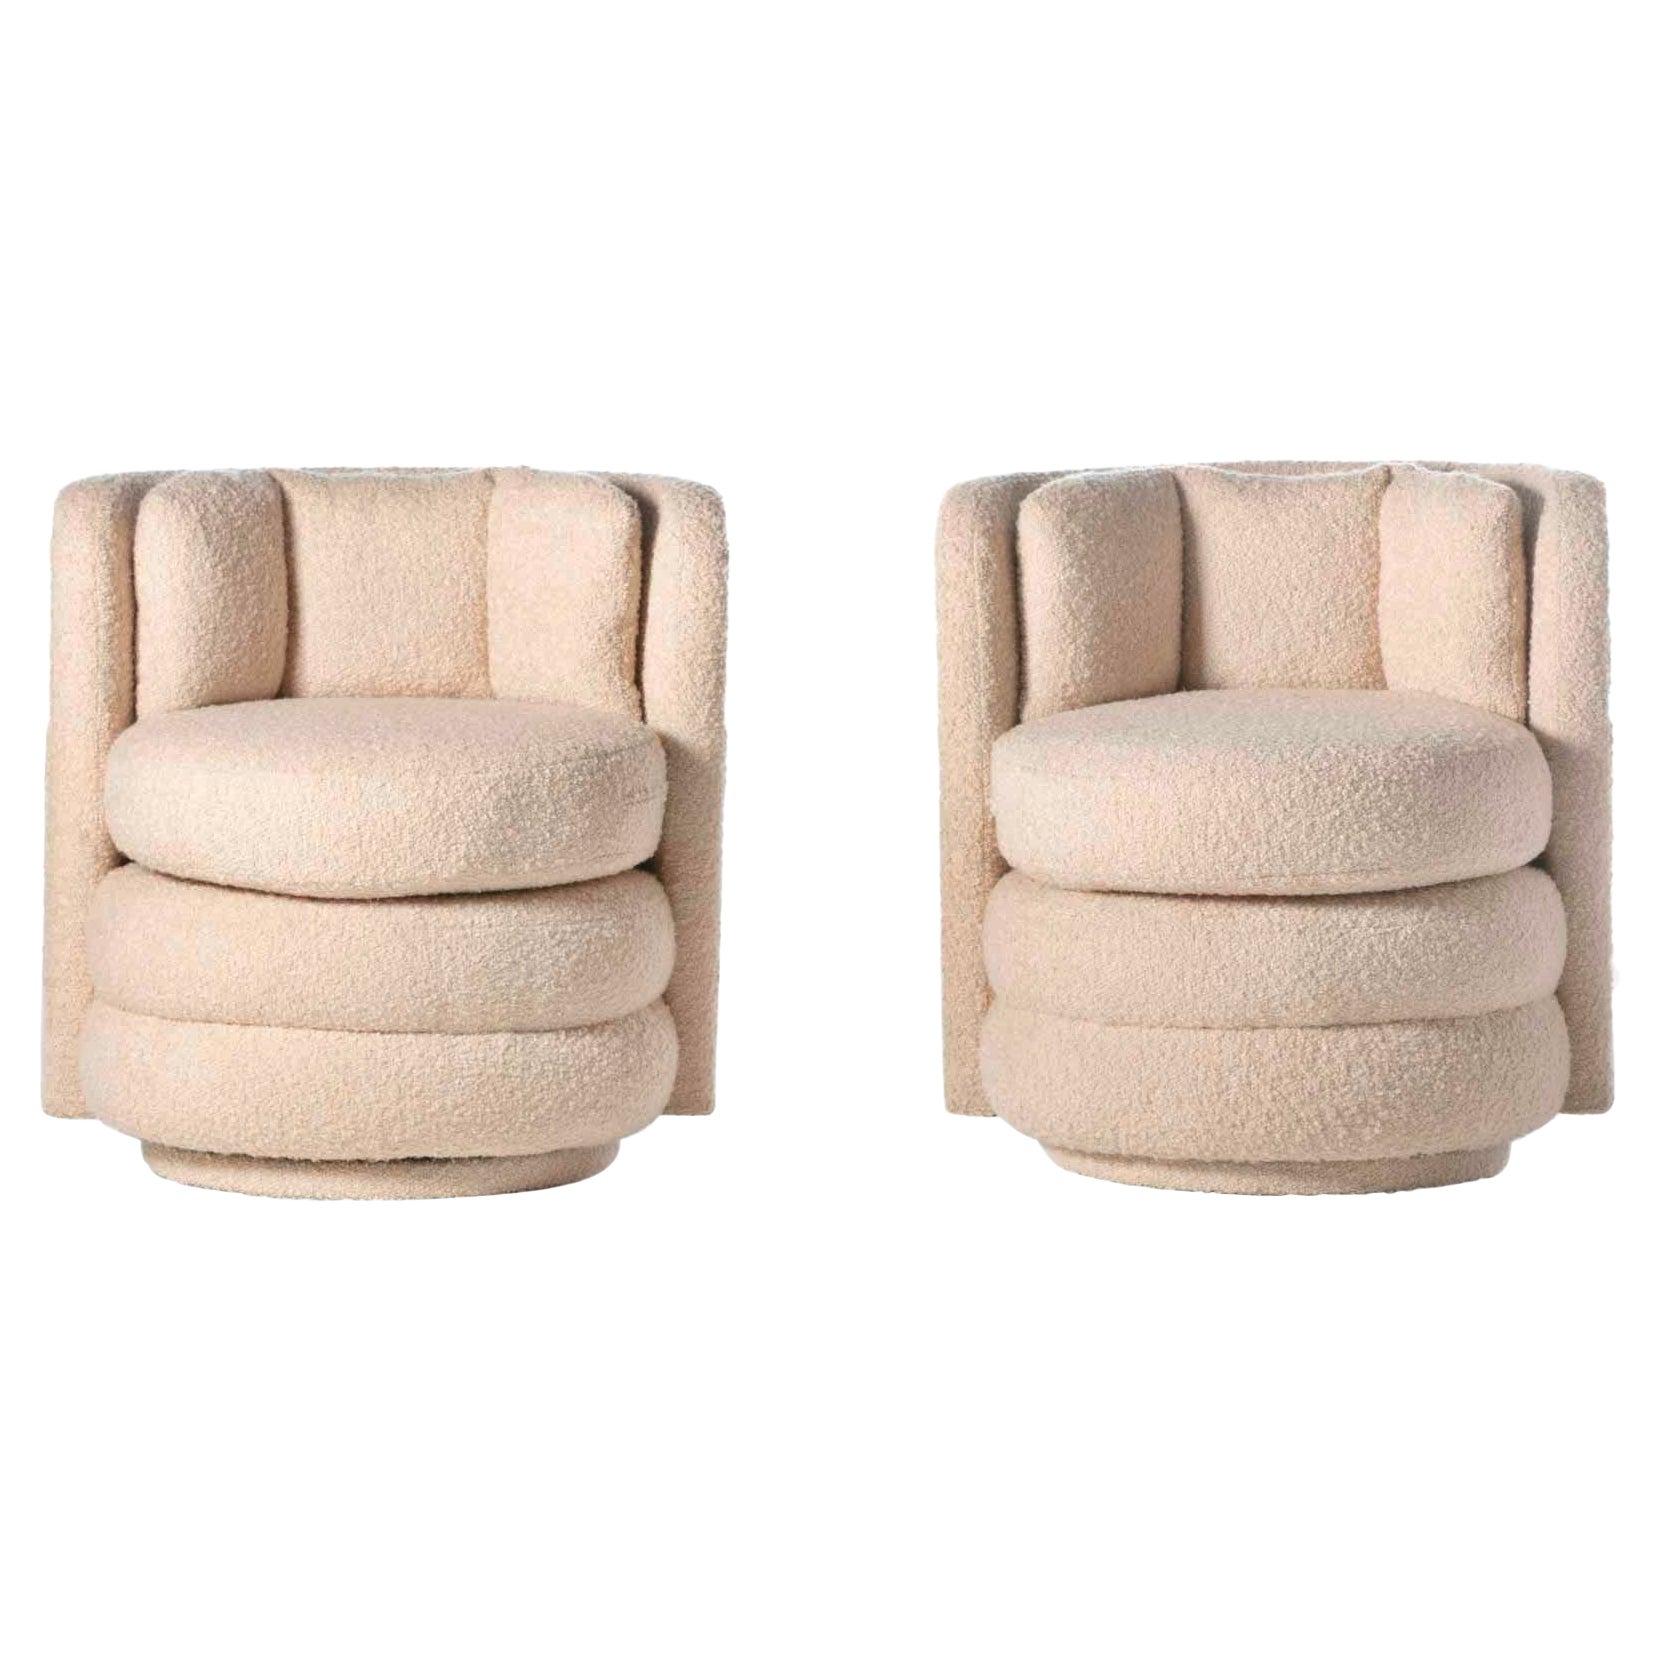 Pair of Post Modern Channeled Swivel Chairs in Blush Pink Bouclé